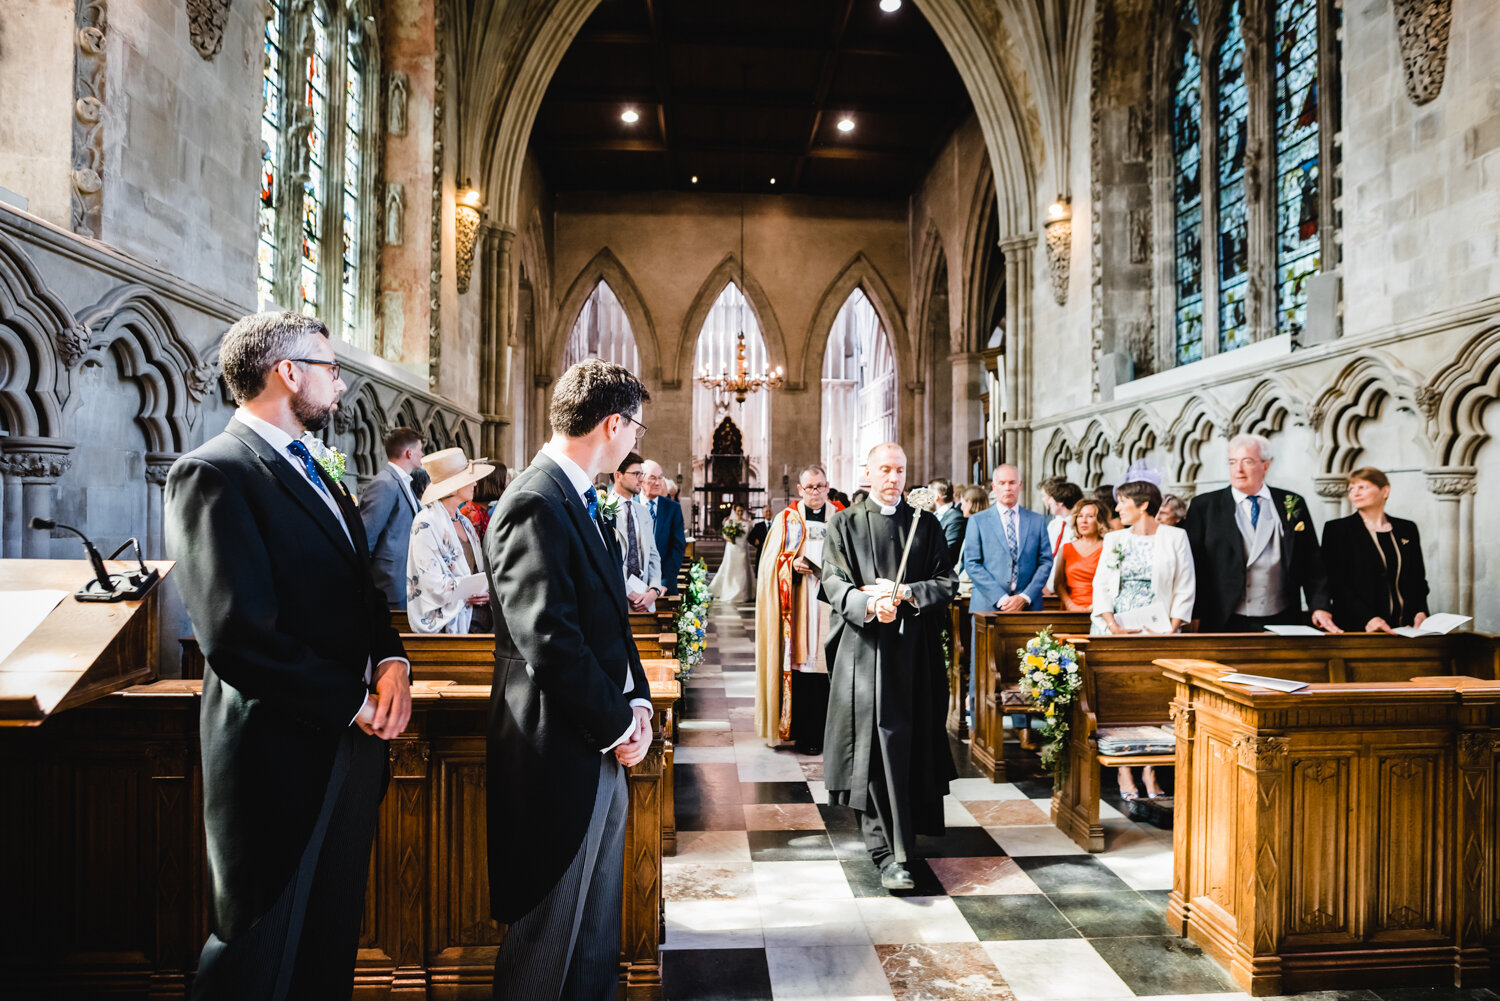 st-albans-cathedral-abbey-wedding-photos-pike-photography-121.jpg